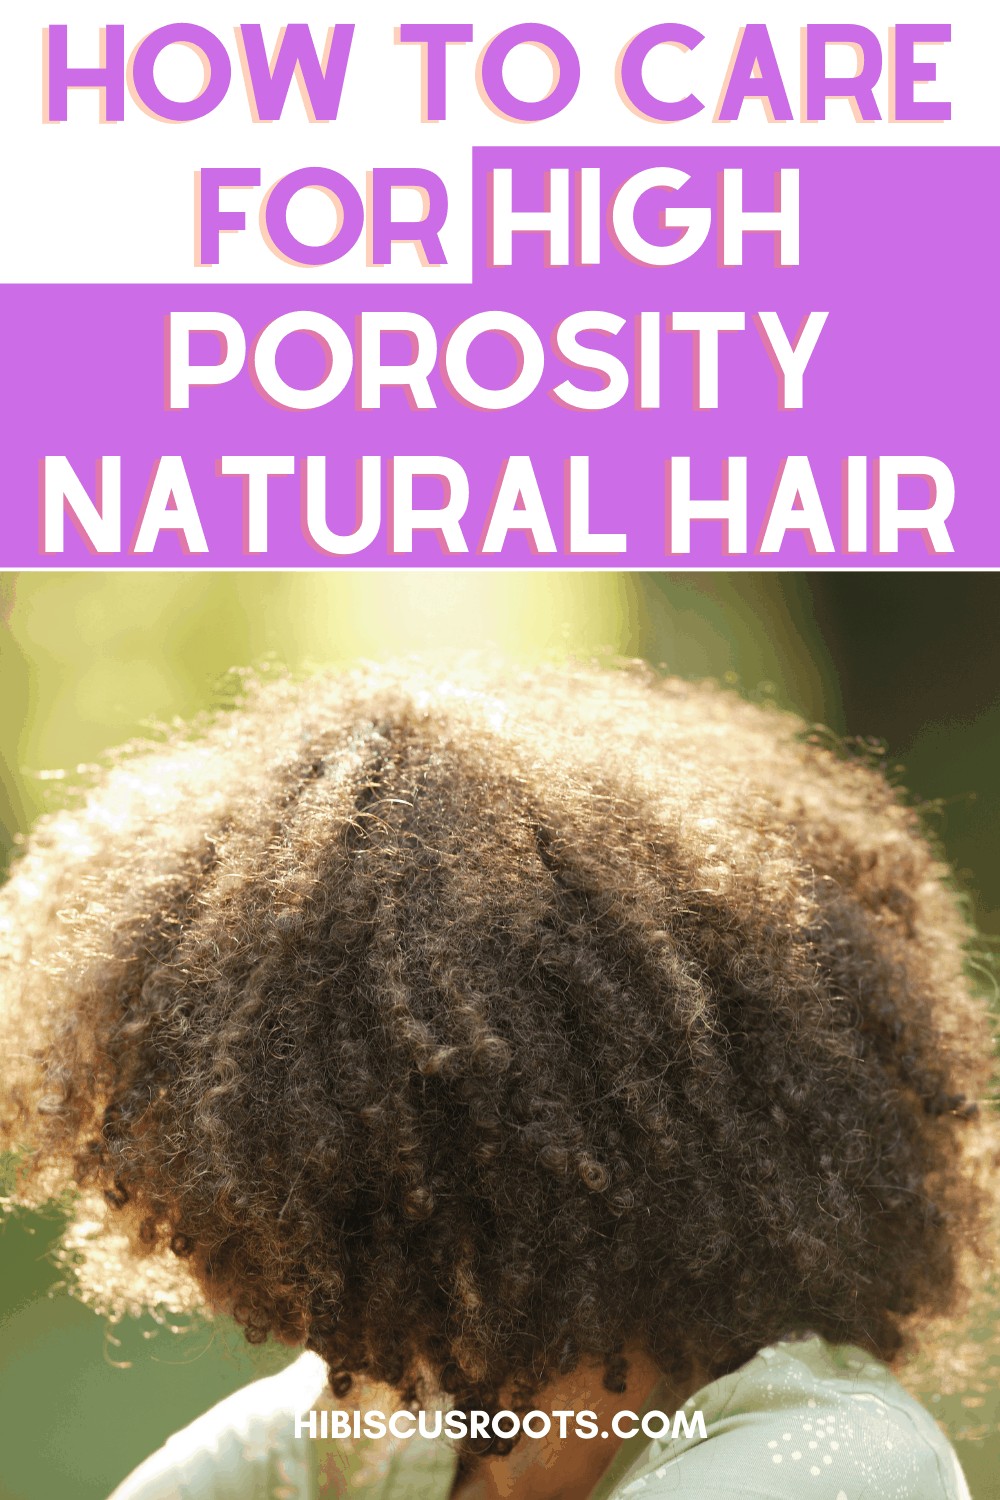 The Complete Guide: High Porosity 4C Hair